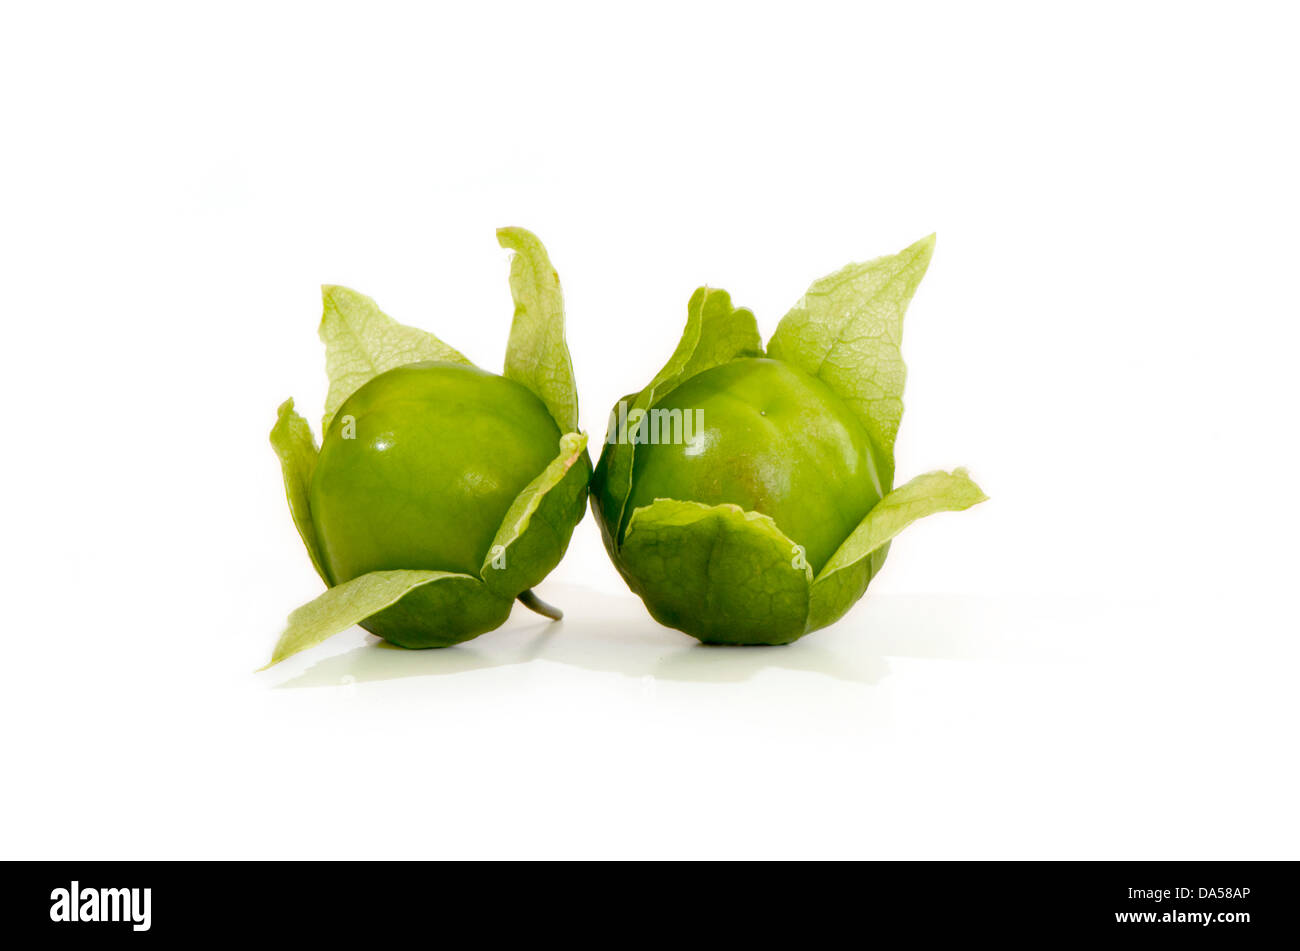 Close-up of Green tomatillo, Physalis philadelphica, fruit on white background. Stock Photo